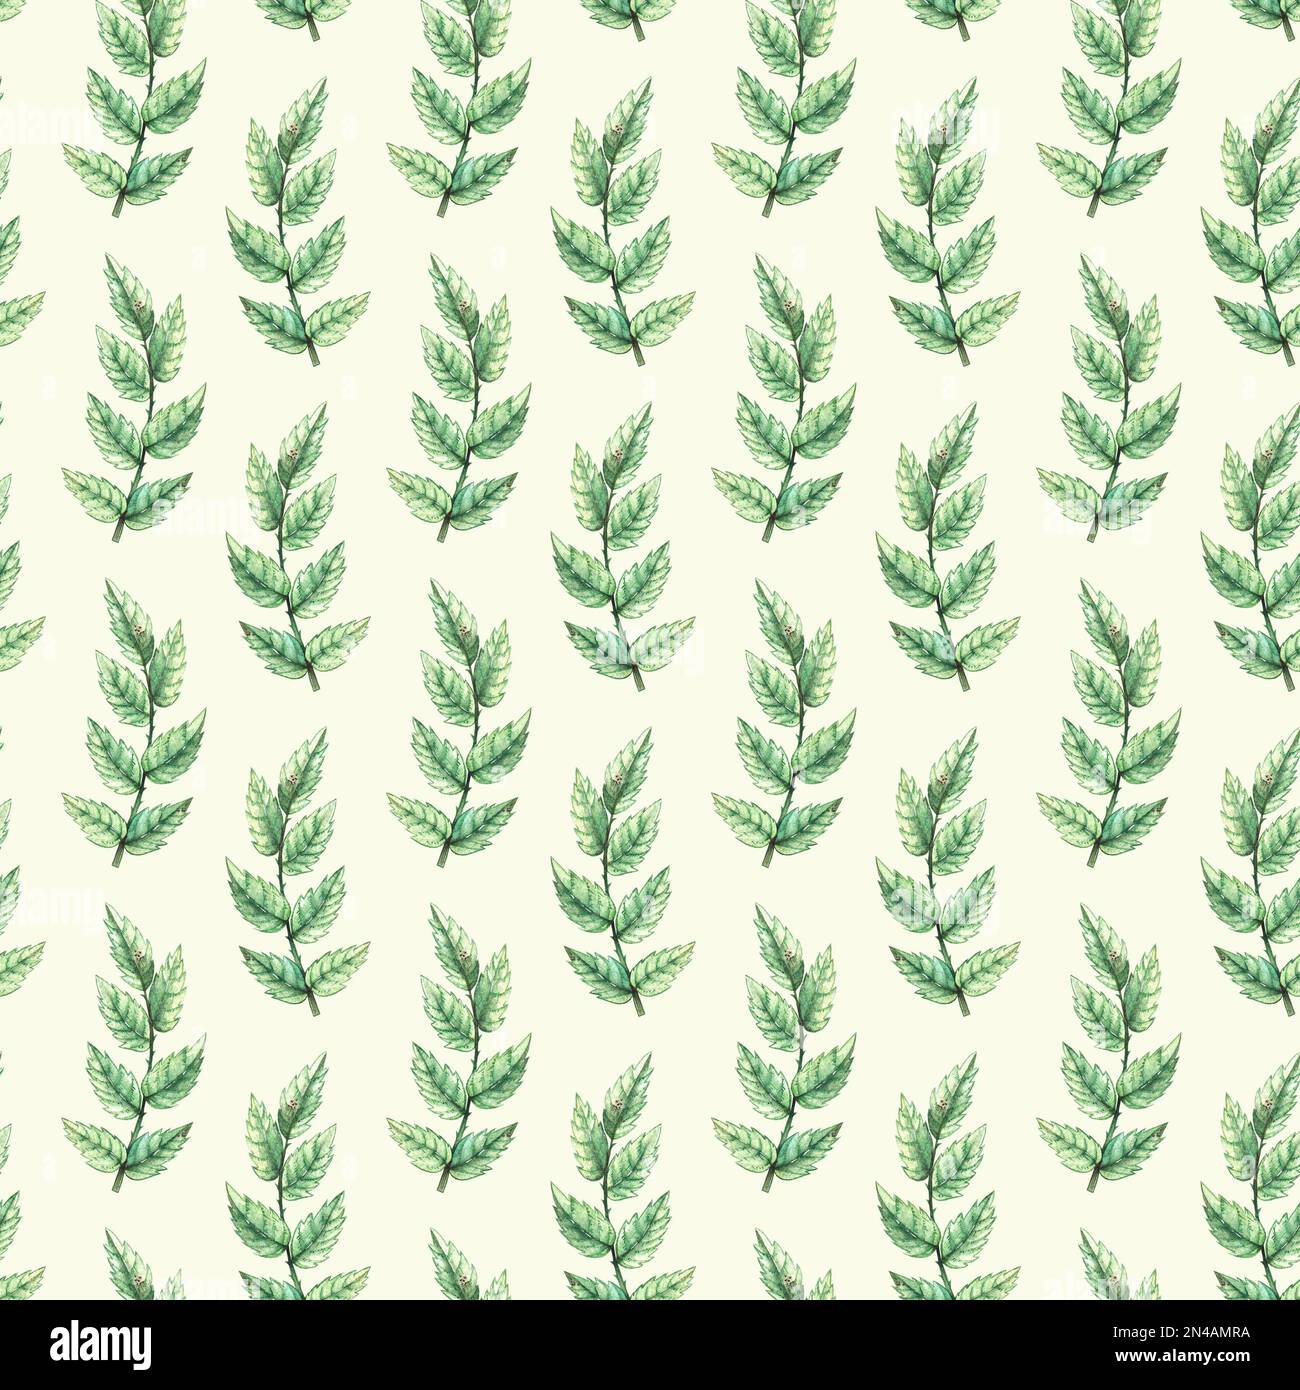 Watercolor green pattern with sprigs of leaves. Botanical pattern to decorate packaging, wallpapers, fabrics, prints, etc. Stock Photo